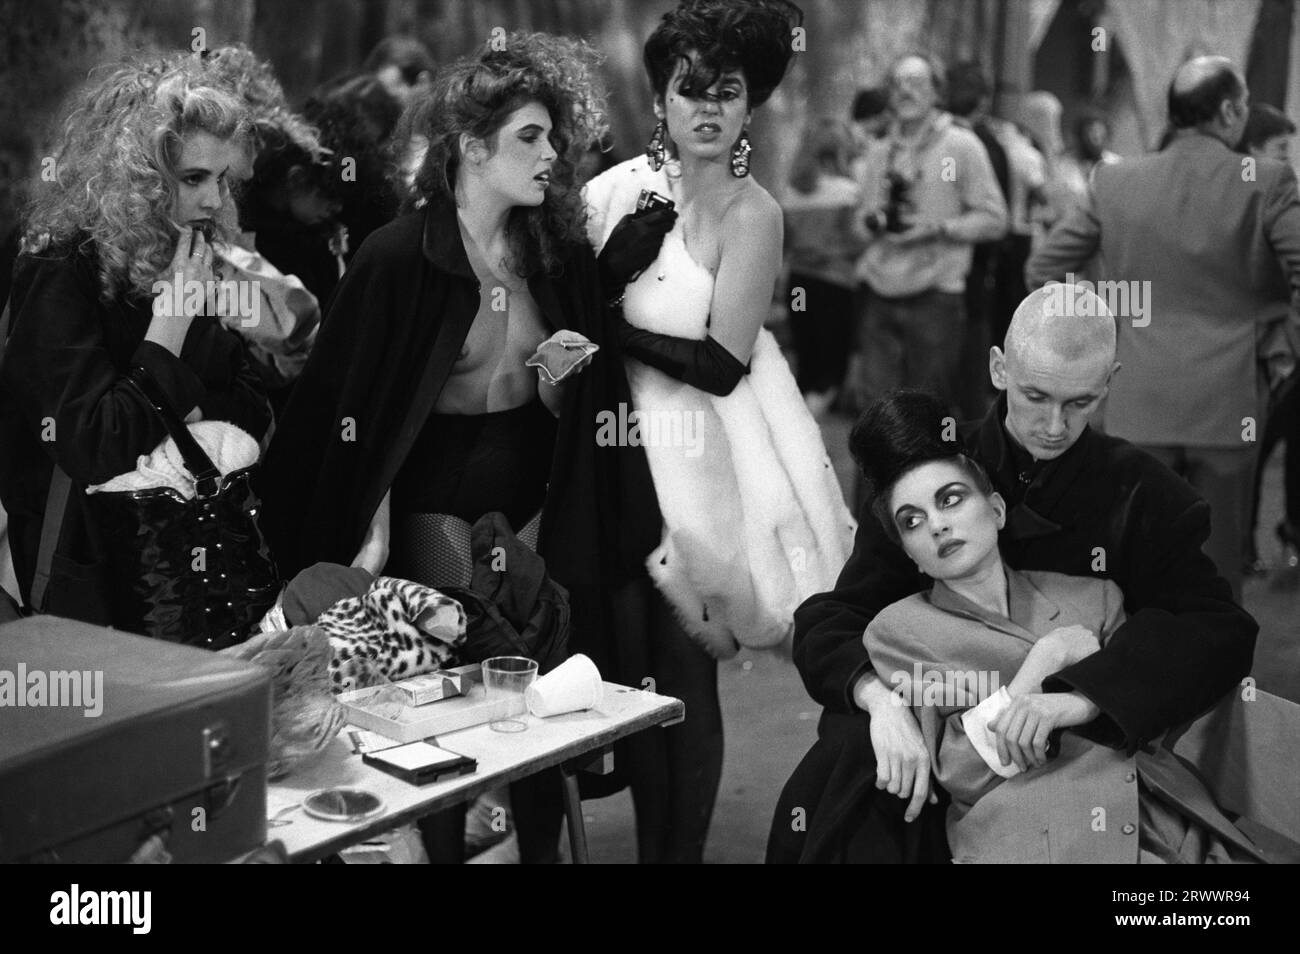 London 1980s UK. Luciana Martinez de la Rosa, known simply as Lulu. (centre-white fur,) who was co-host of at the Alternative Miss World Competition and Princess Julia (bottom right, with coat). The Alternative Miss World Competition was a pansexual beauty pageant competition and art and fashion event staged by artist Andrew Logan.  Grand Hall, Olympia, West London England 1981. 1980s UK HOMER SYKES Stock Photo